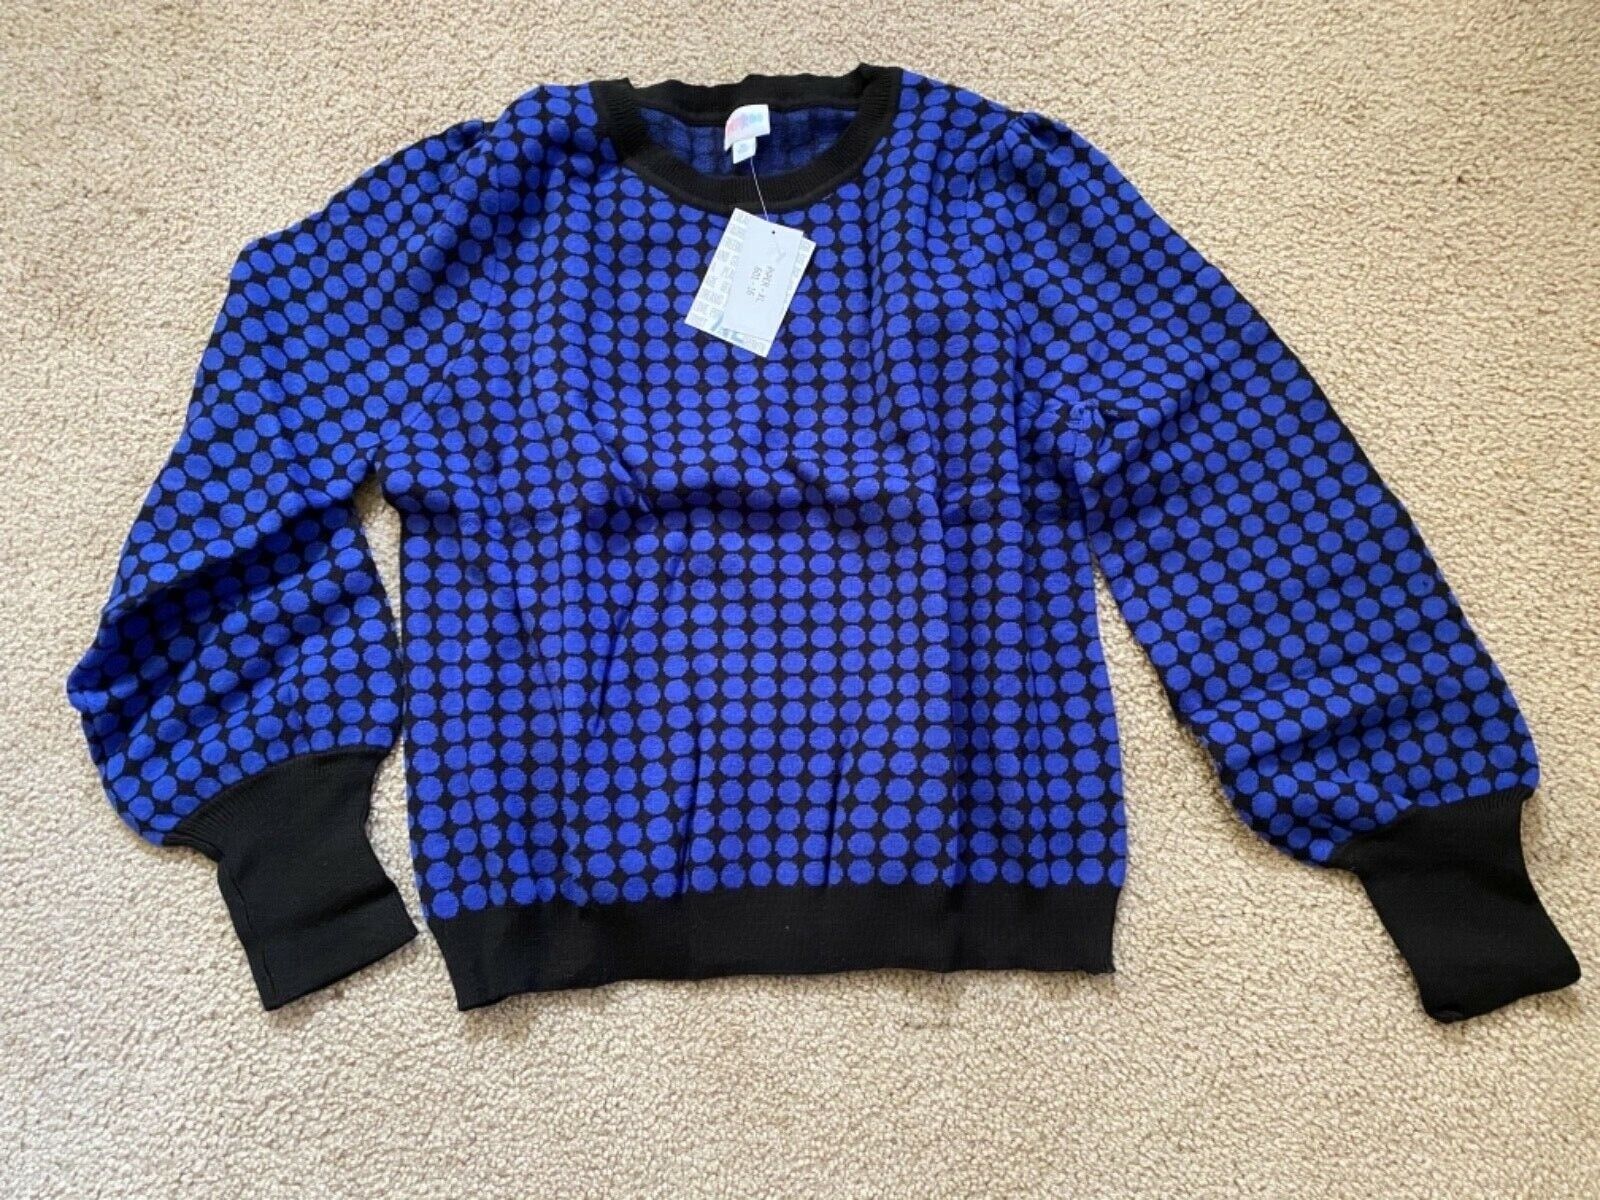 Primary image for NWT Lularoe XL X-Large Piper Balloon Sleeved Sweater Navy Blue Dot Ringer